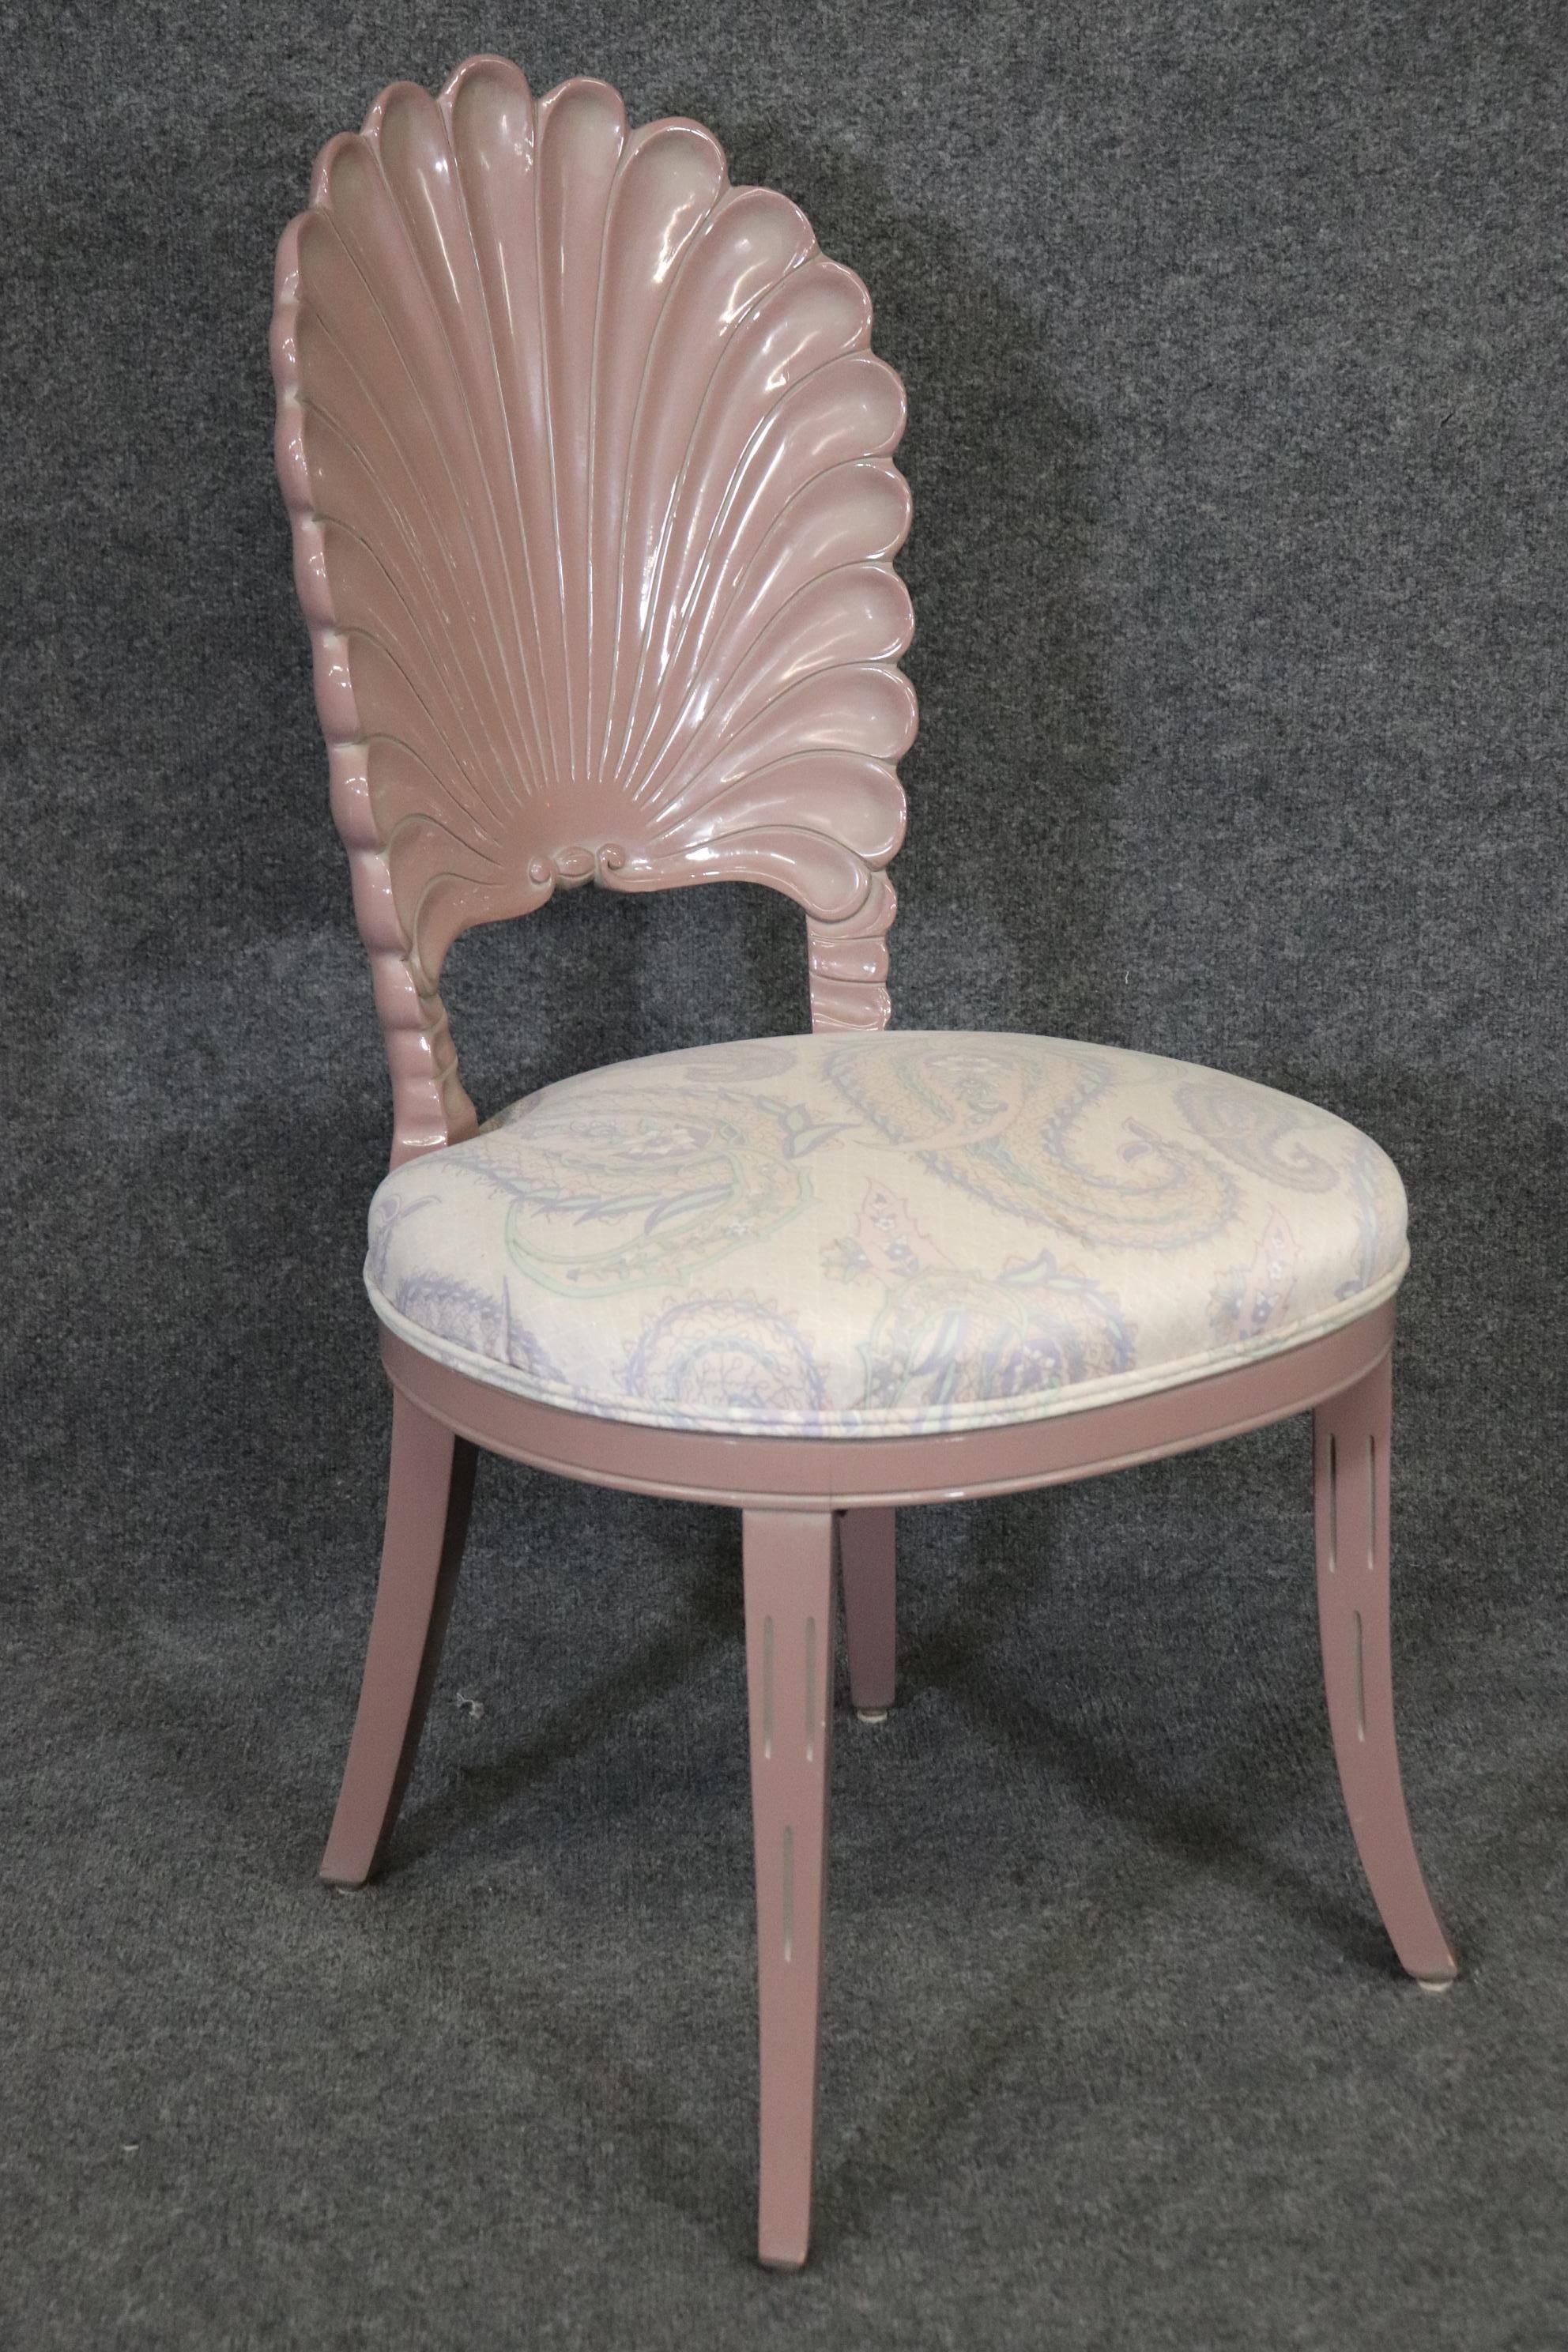 This is a stunning set of 6 Grotto shell style chairs in the manner of Serge Roche in a painted finish with beautiful paisley upholstery. The chairs can be painted in any color you wish and even done in gold leaf if desired. These chairs are very